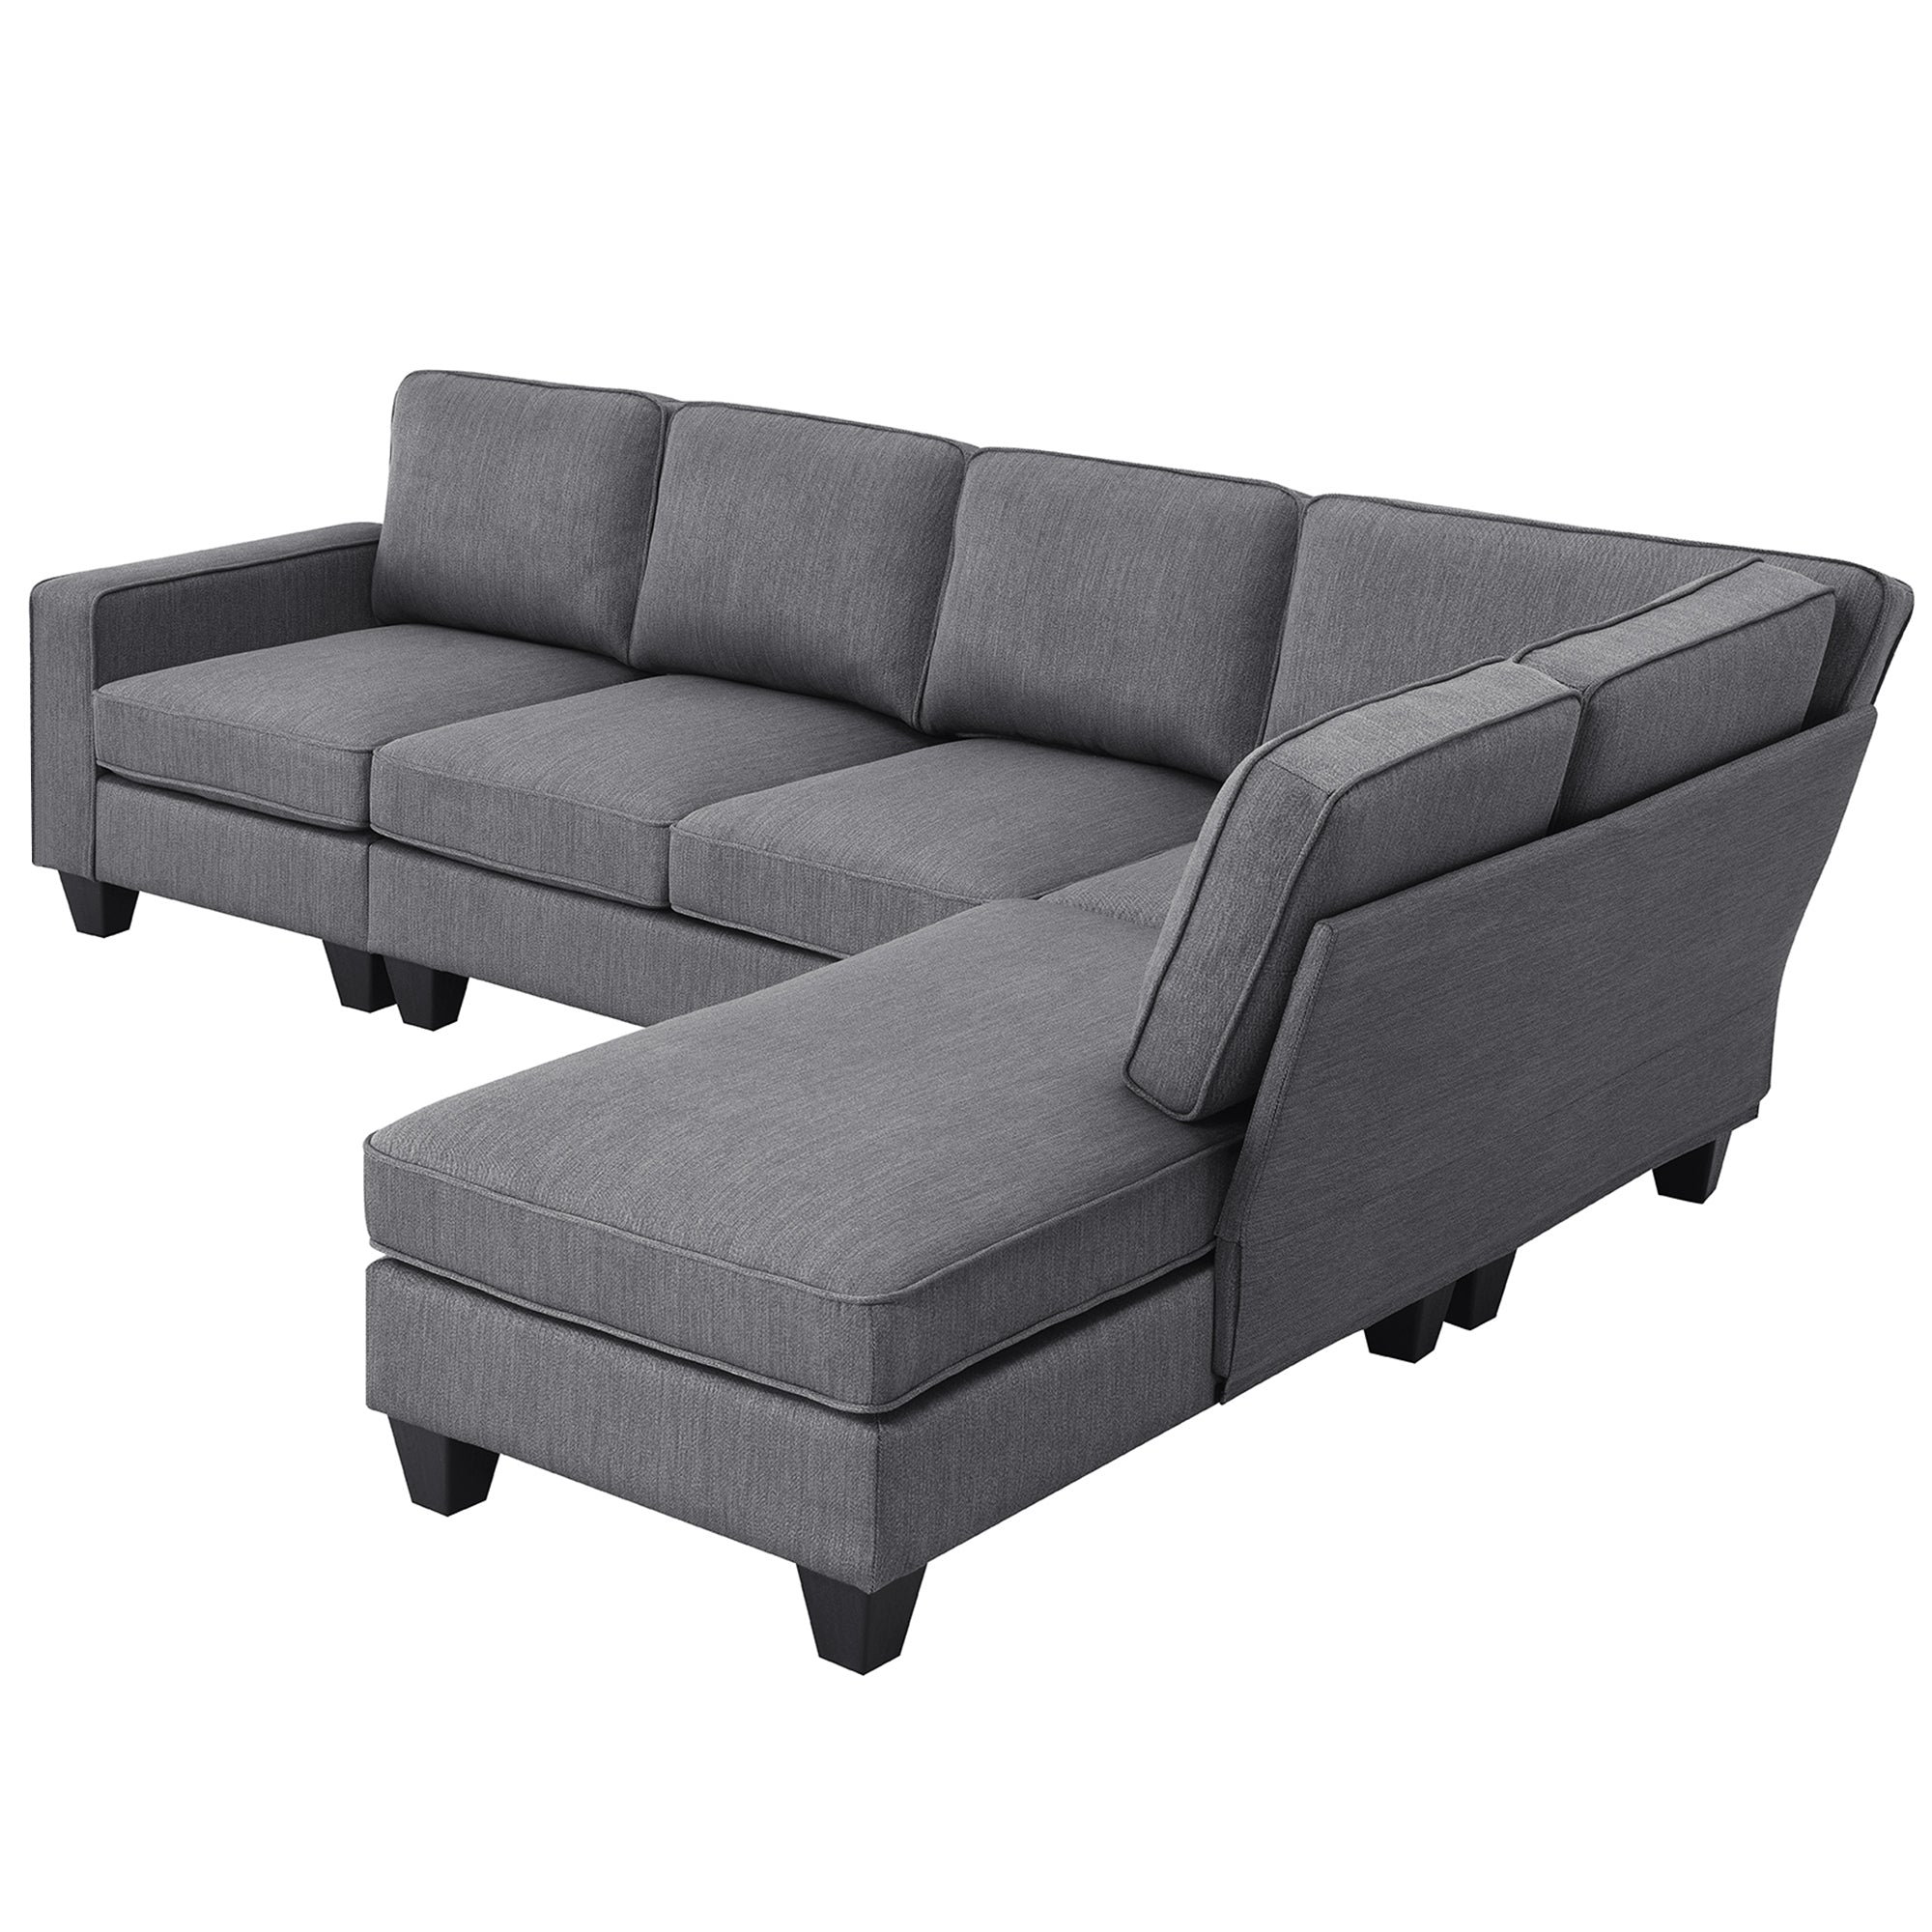 104.3*78.7" Modern L-shaped Sectional Sofa,7-seat Linen Fabric Couch Set with Chaise Lounge and Convertible Ottoman